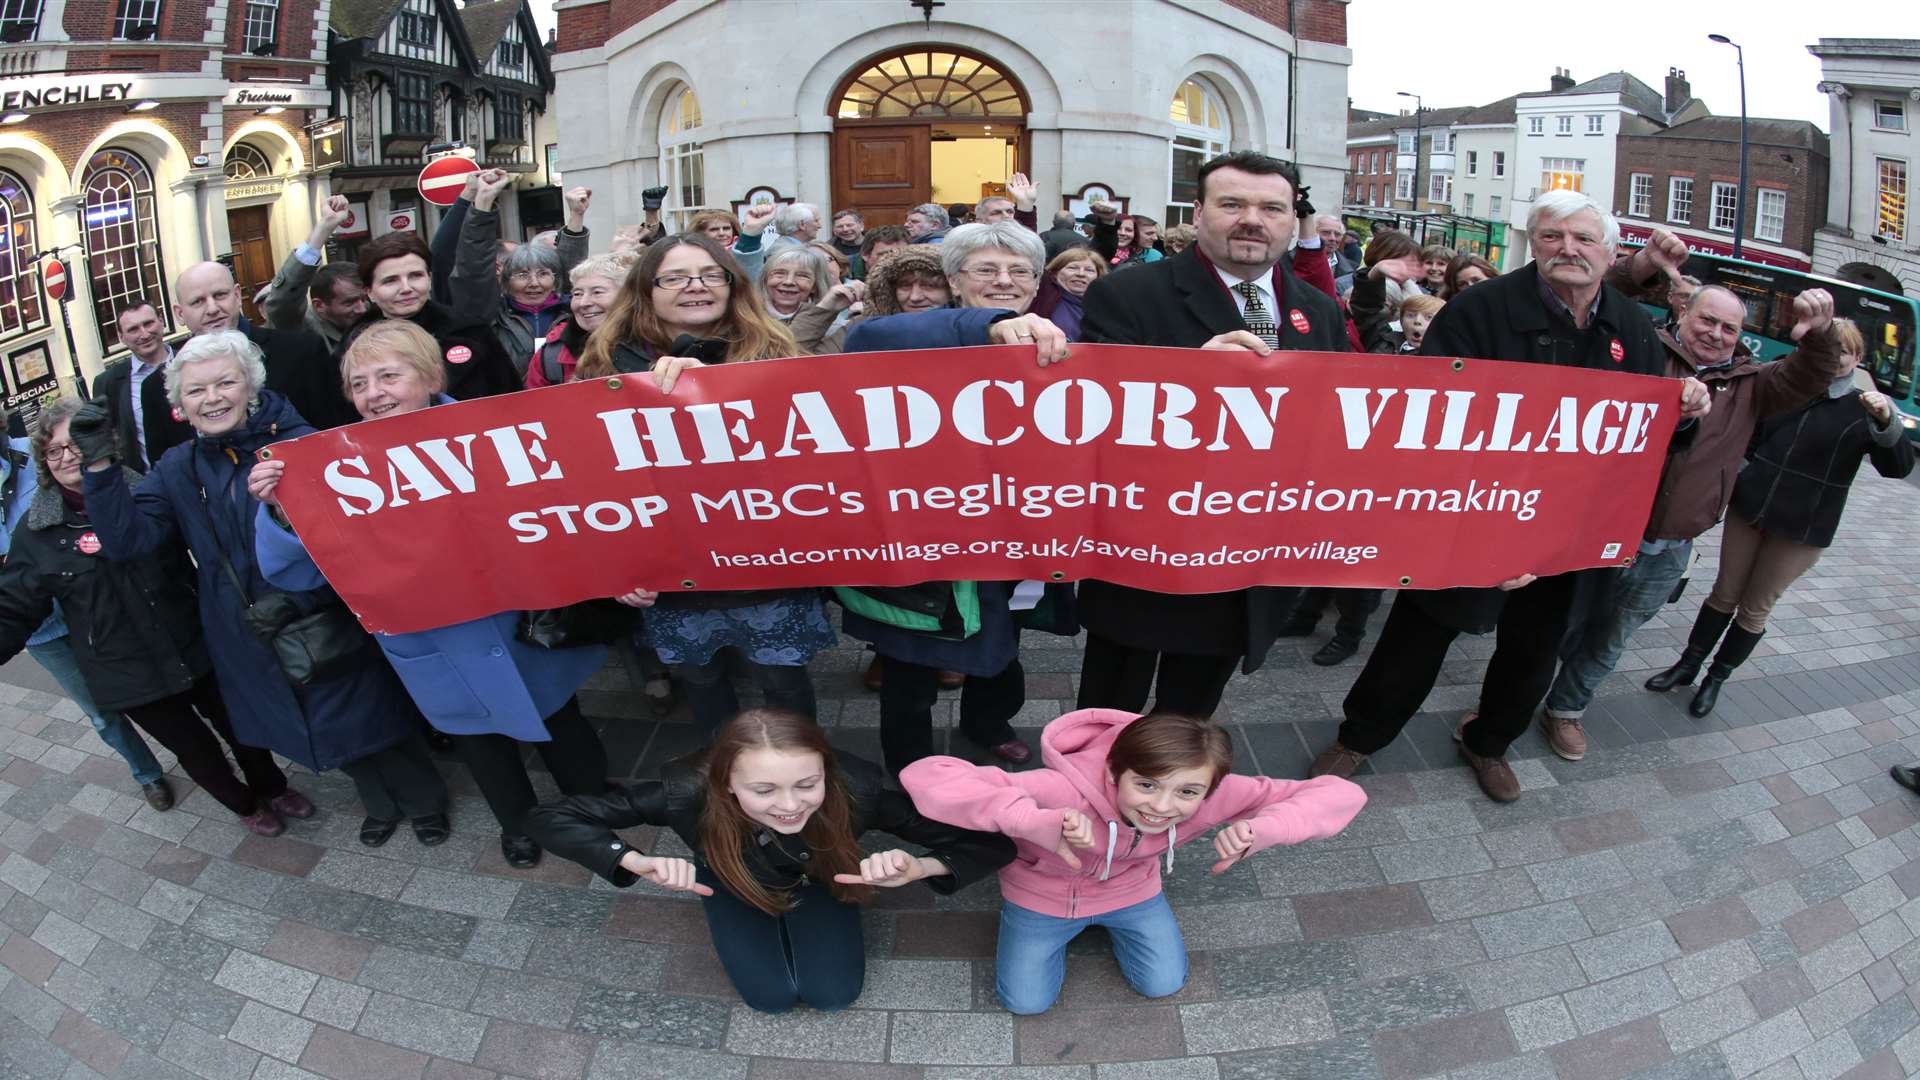 Protesters gather outside with banners against the building development in Headcorn